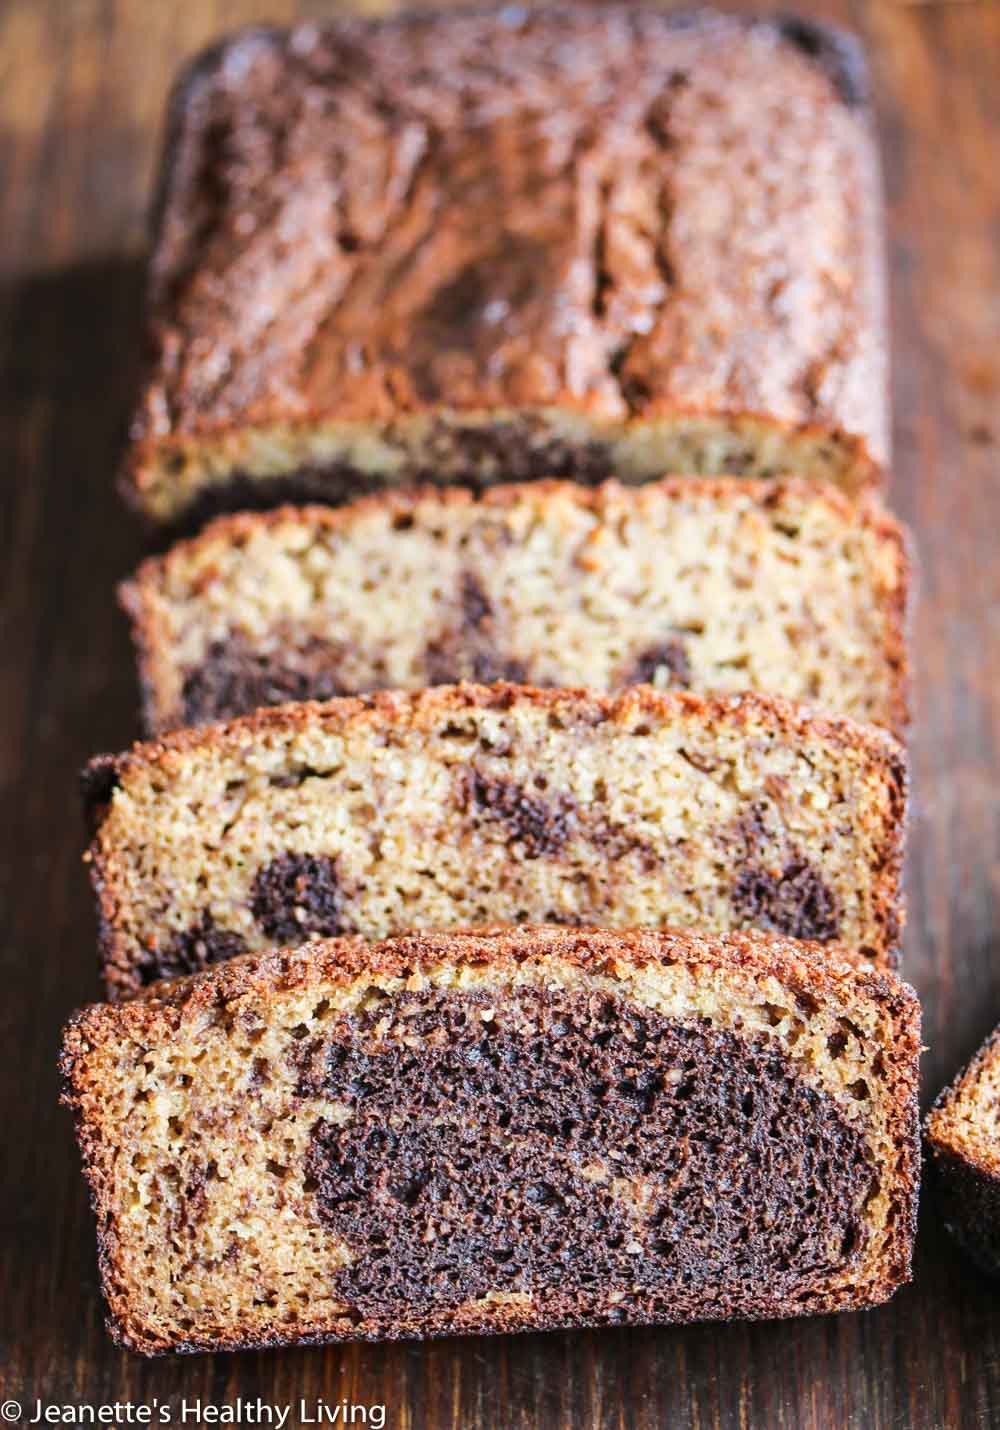 Gluten Free Marbled Chocolate Banana Quick Bread - made with oat flour and almond flour, this quick bread is healthy and delicious!